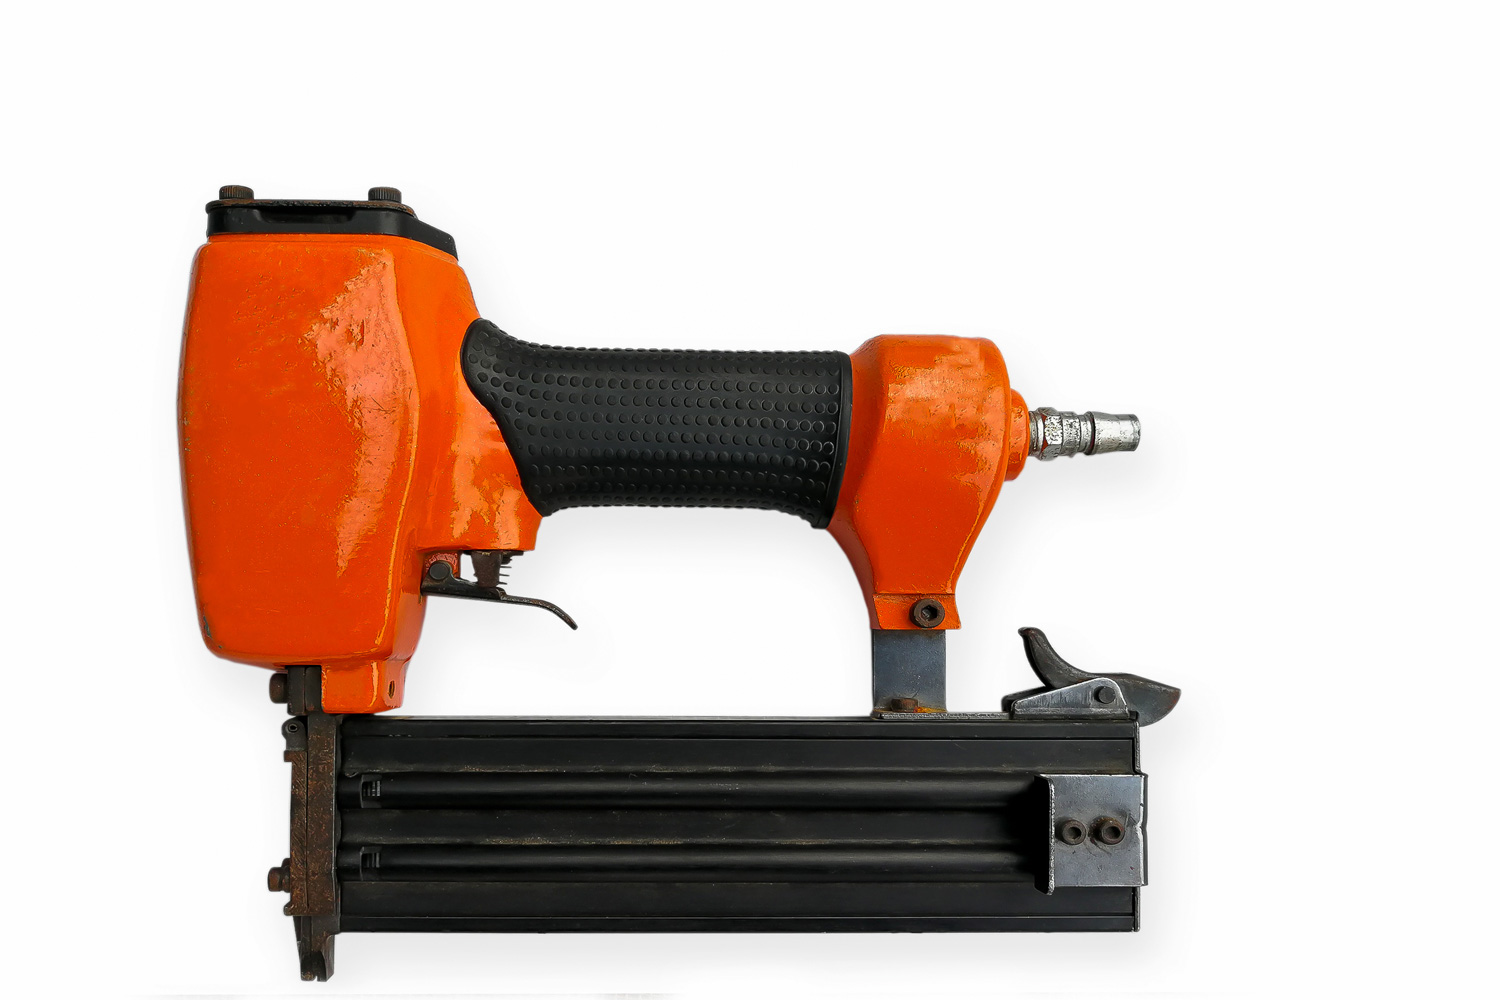 Compressed air brad nailer on white background